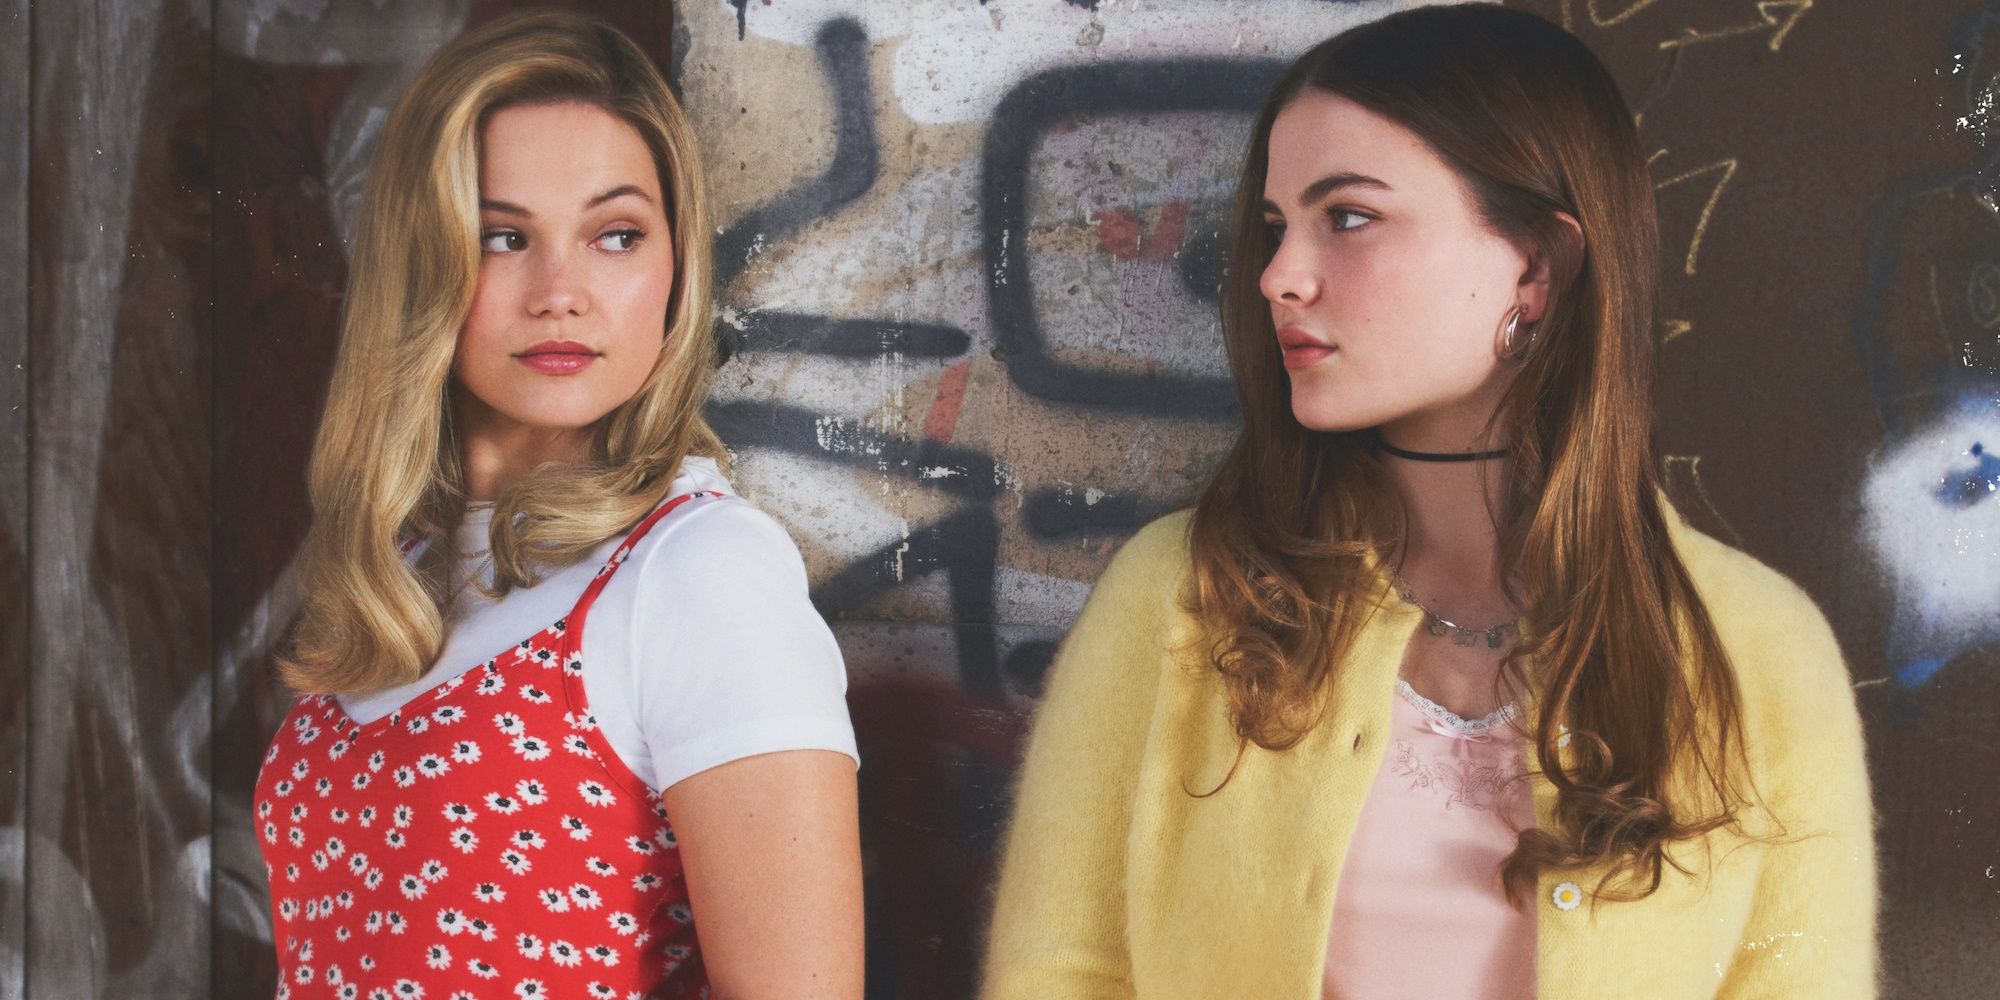 Olivia Holt plays Kate, the popular and charming high school girl that Chiara Aurelia's Jeanette aspires to become.